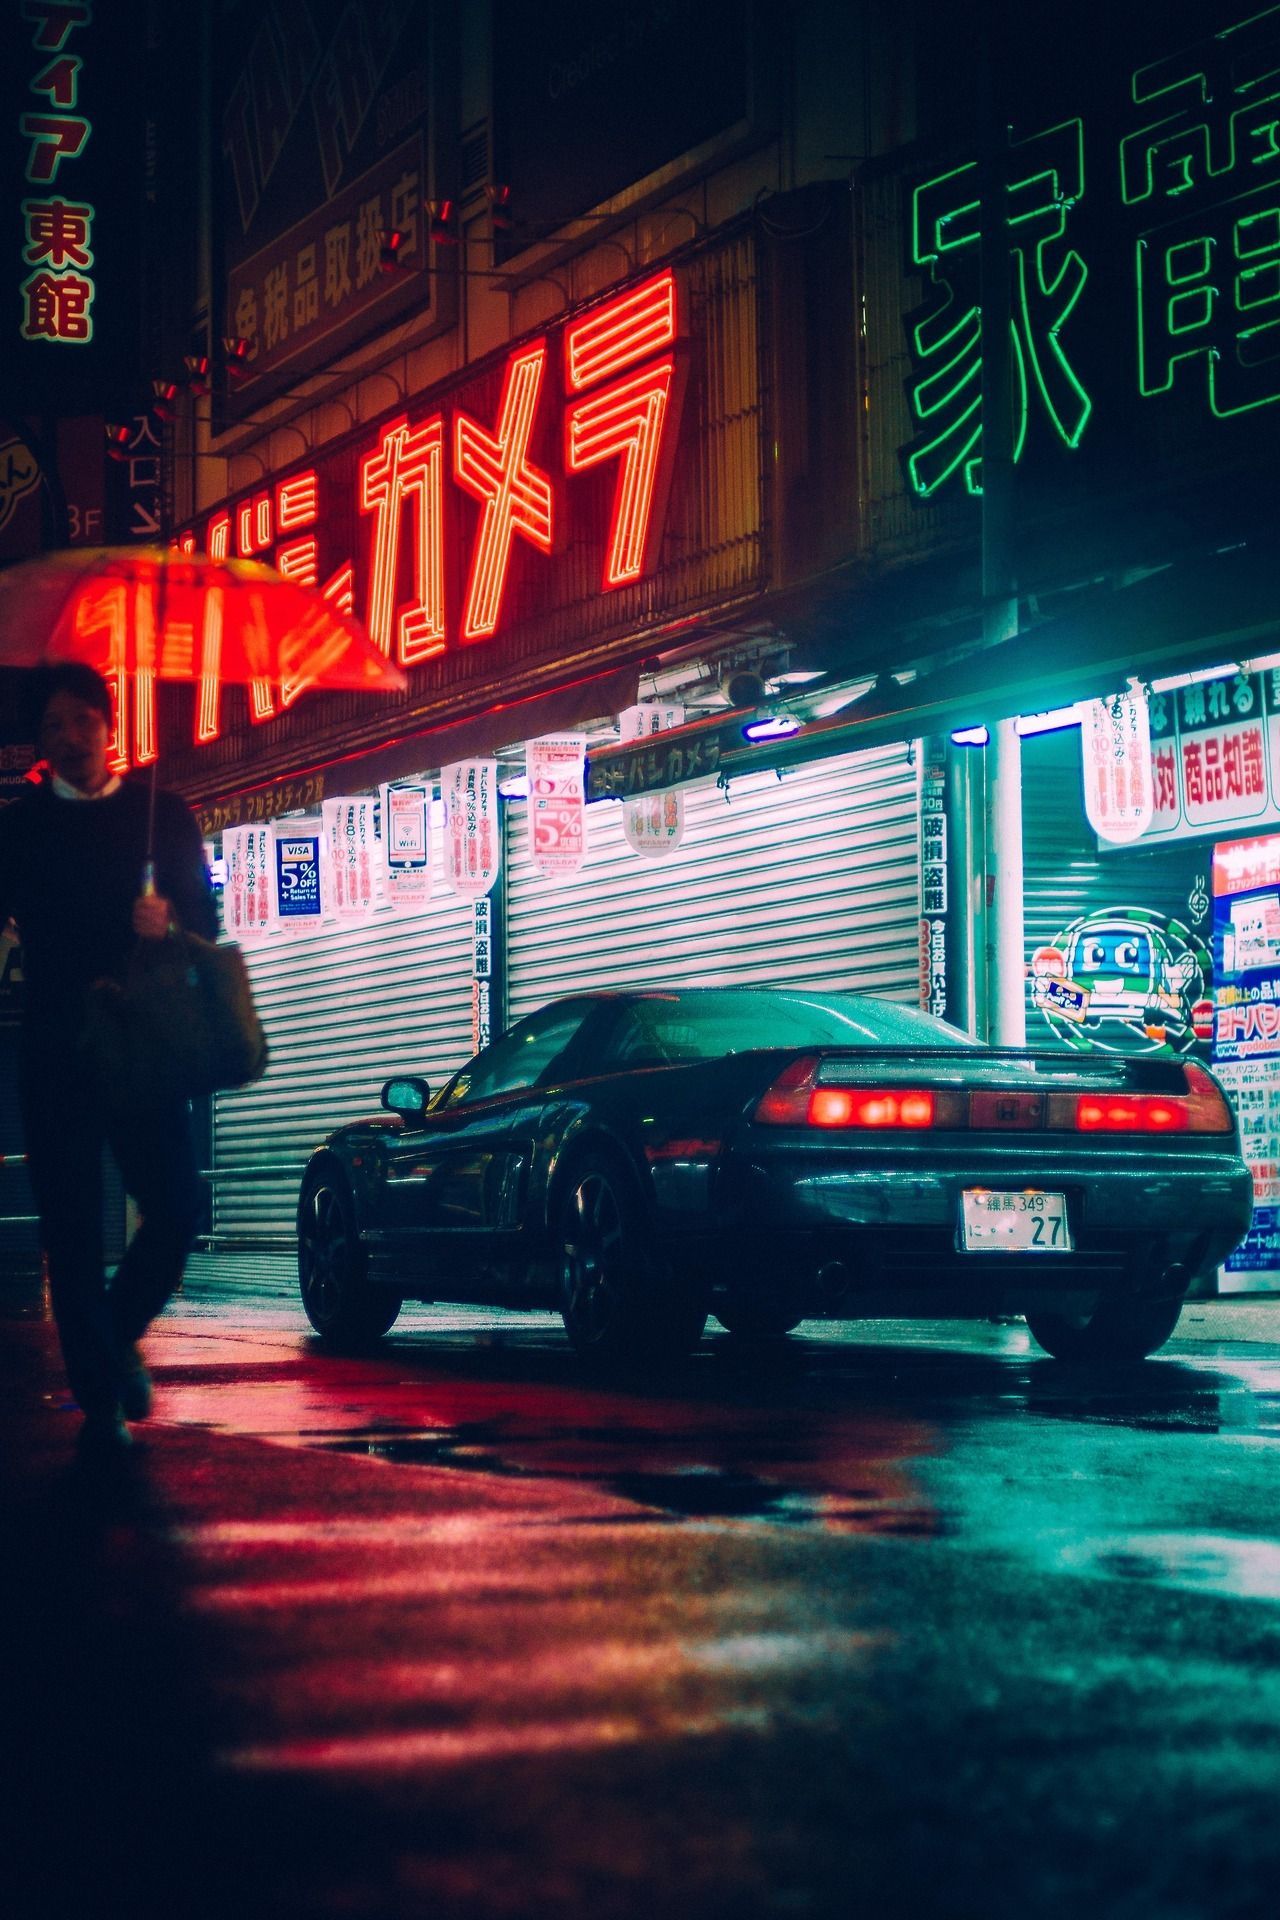 Follow me for more /alphalif3style ! We show luxury in form of cars dresses accessoires girls travel and much more :D. Jdm cars, Nissan 180sx, Nsx